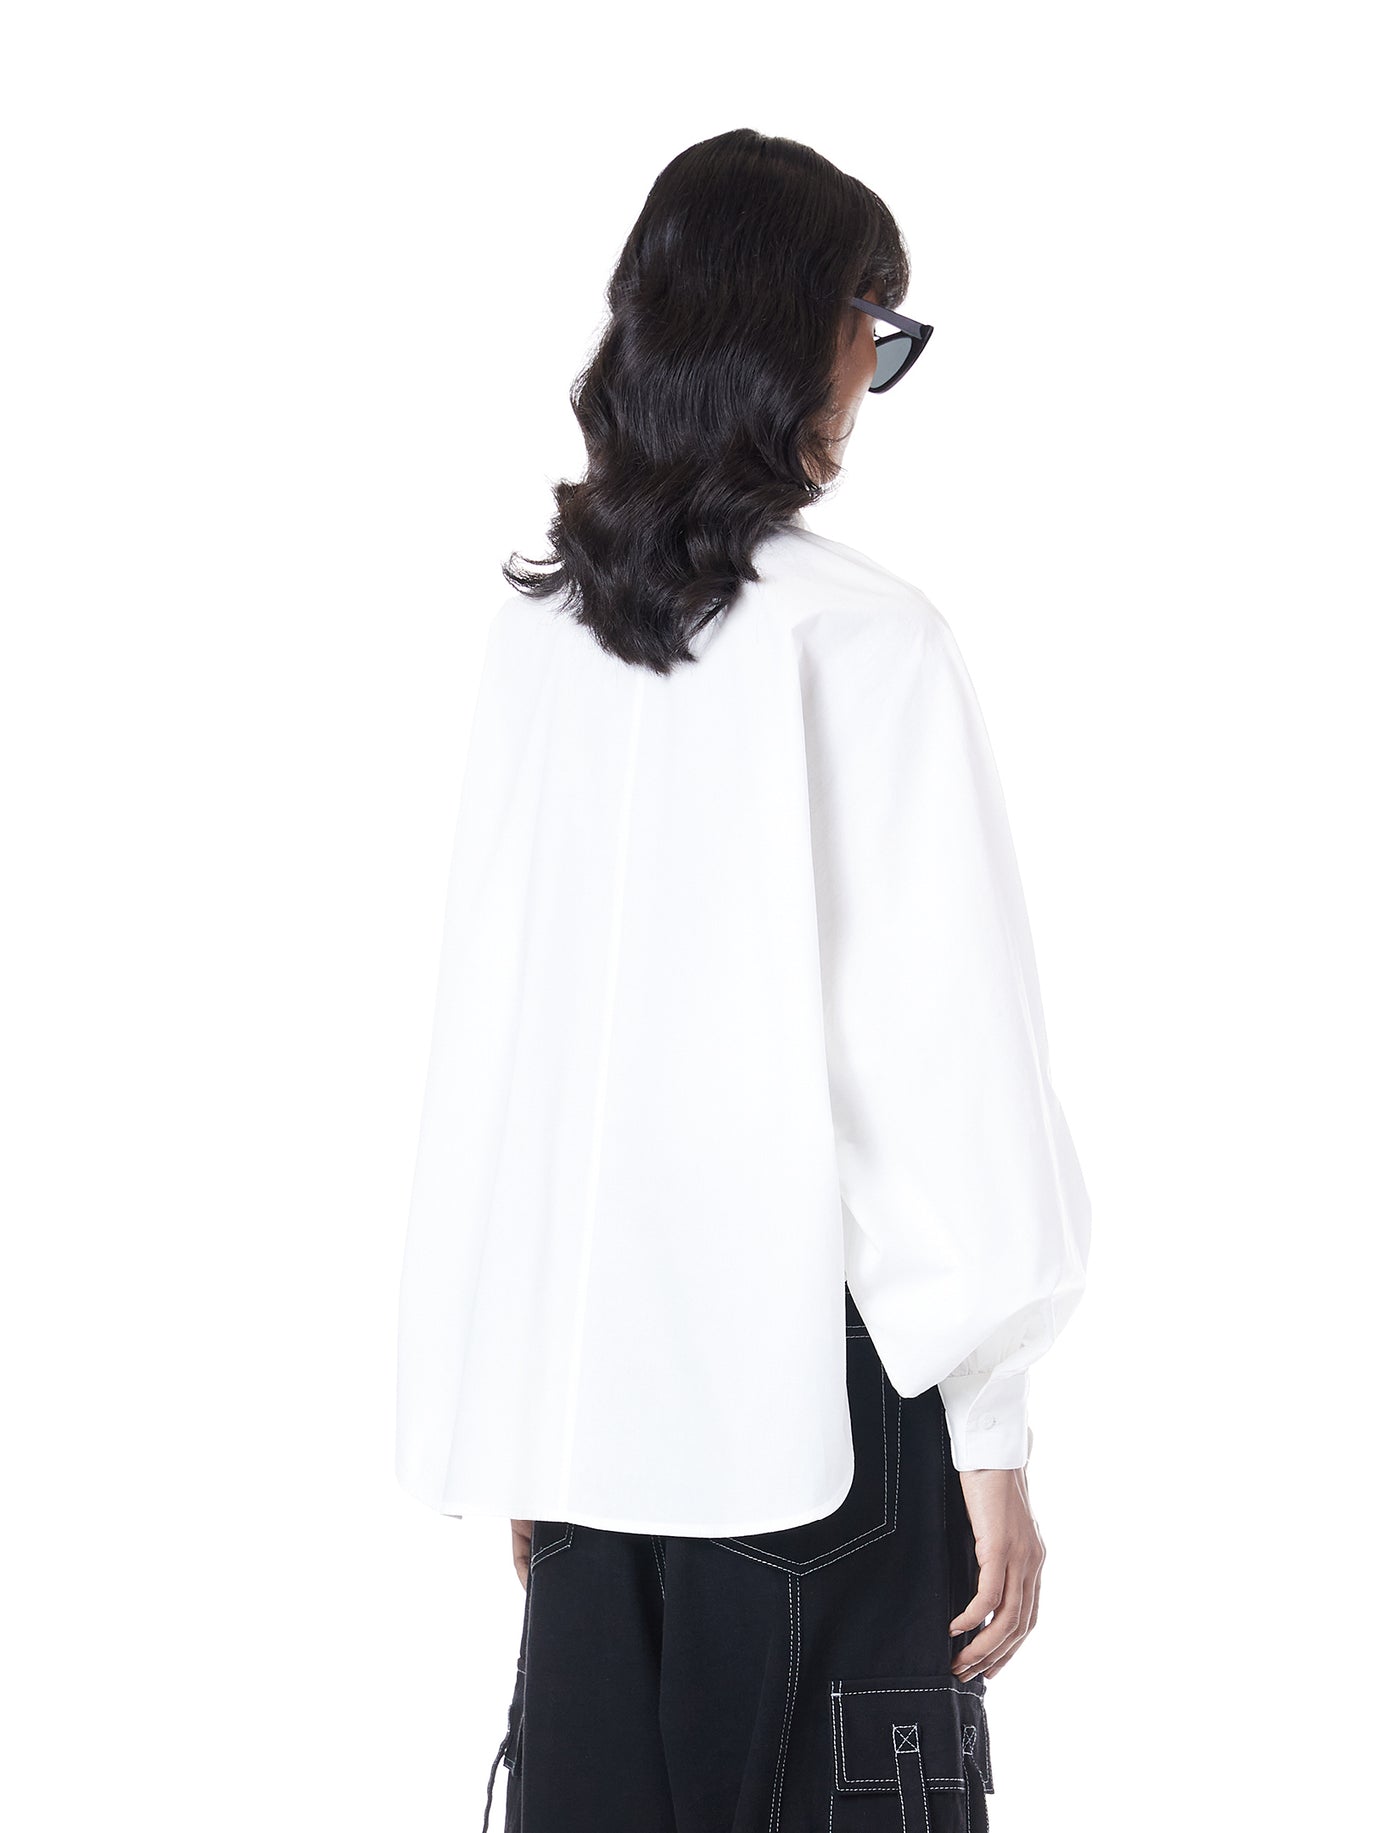 HANDCRAFTED TIE-UP BATWING SHIRT